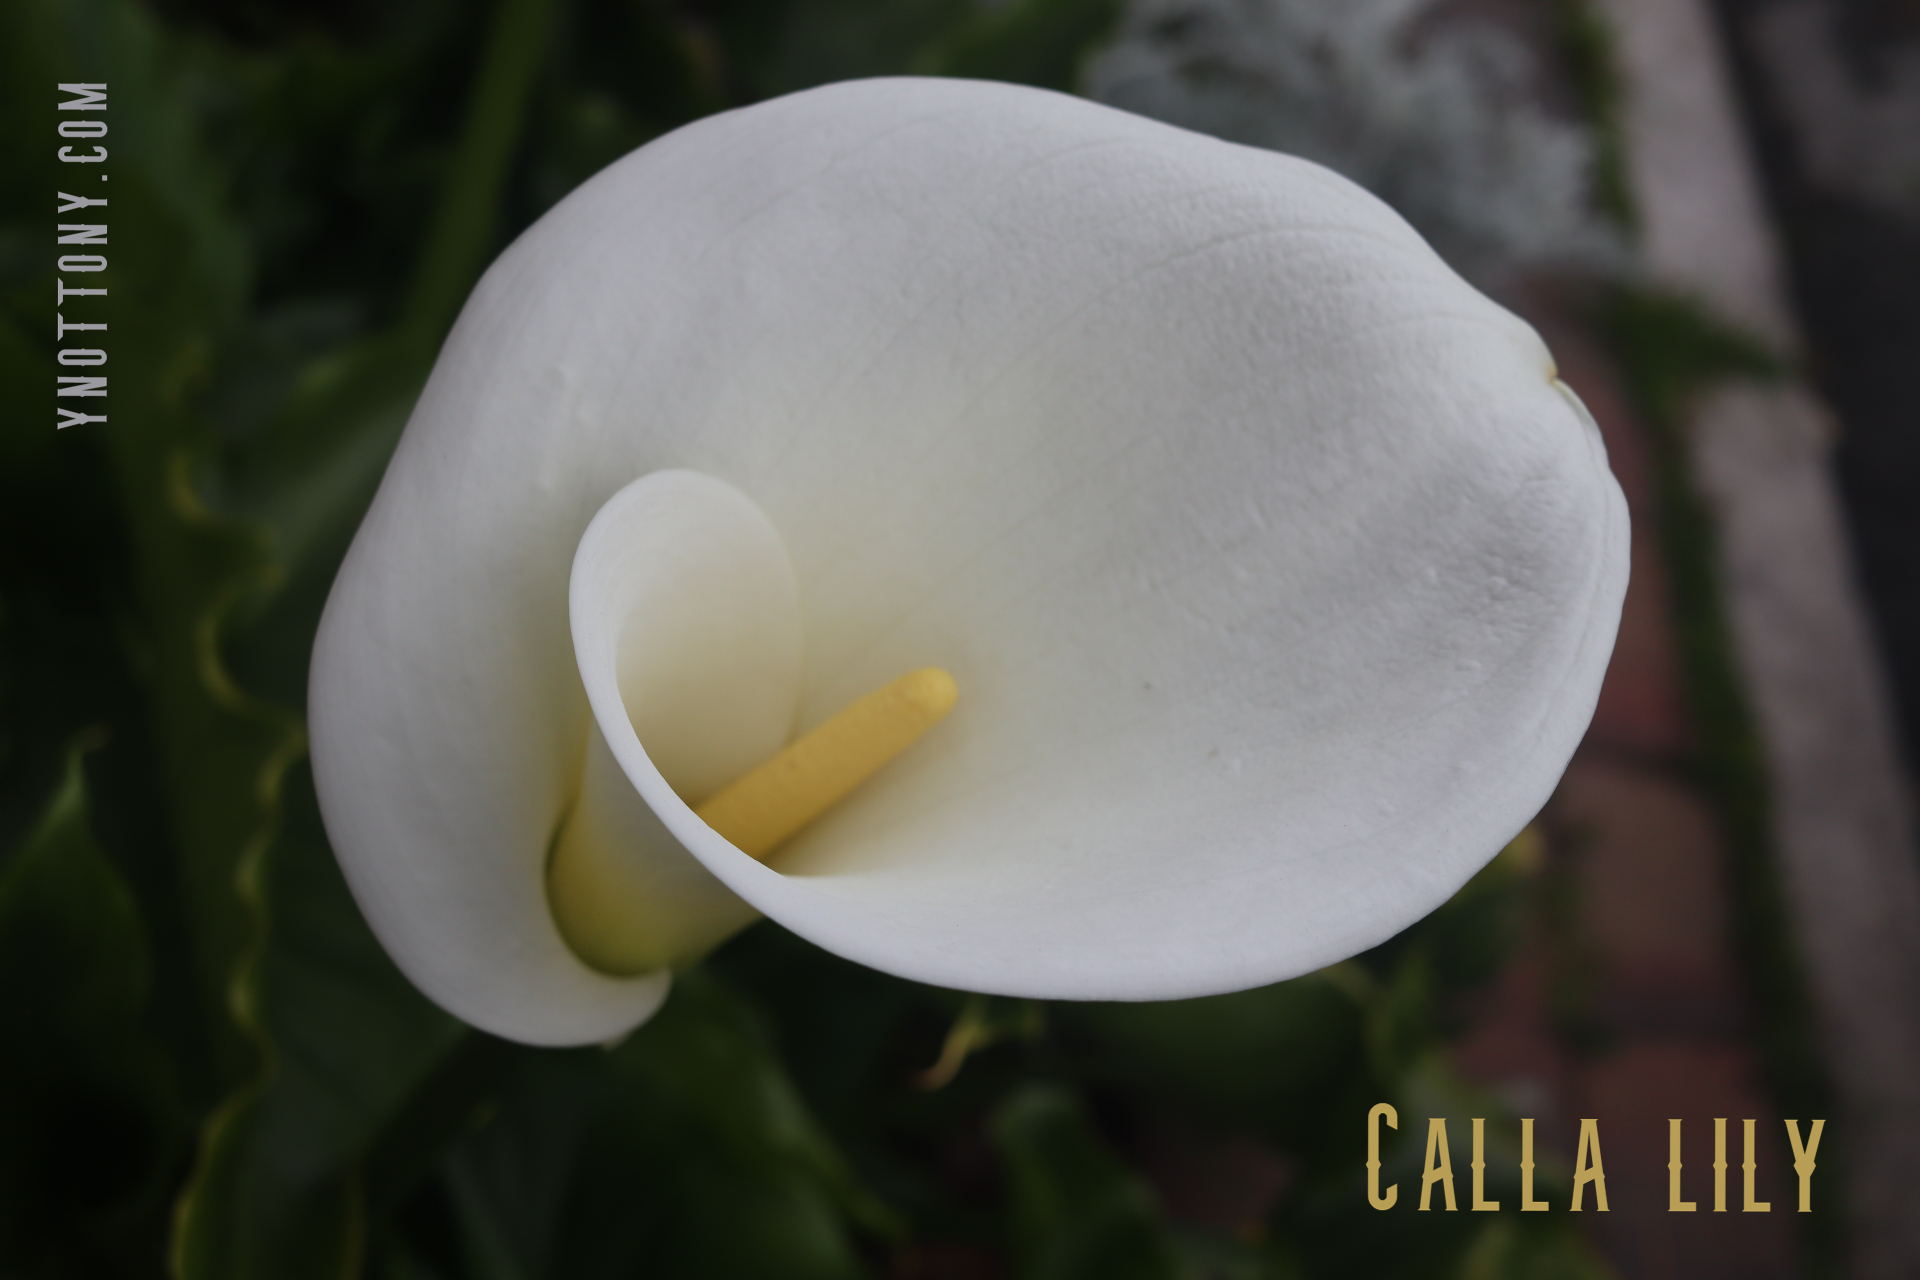 Calla lily flower in White